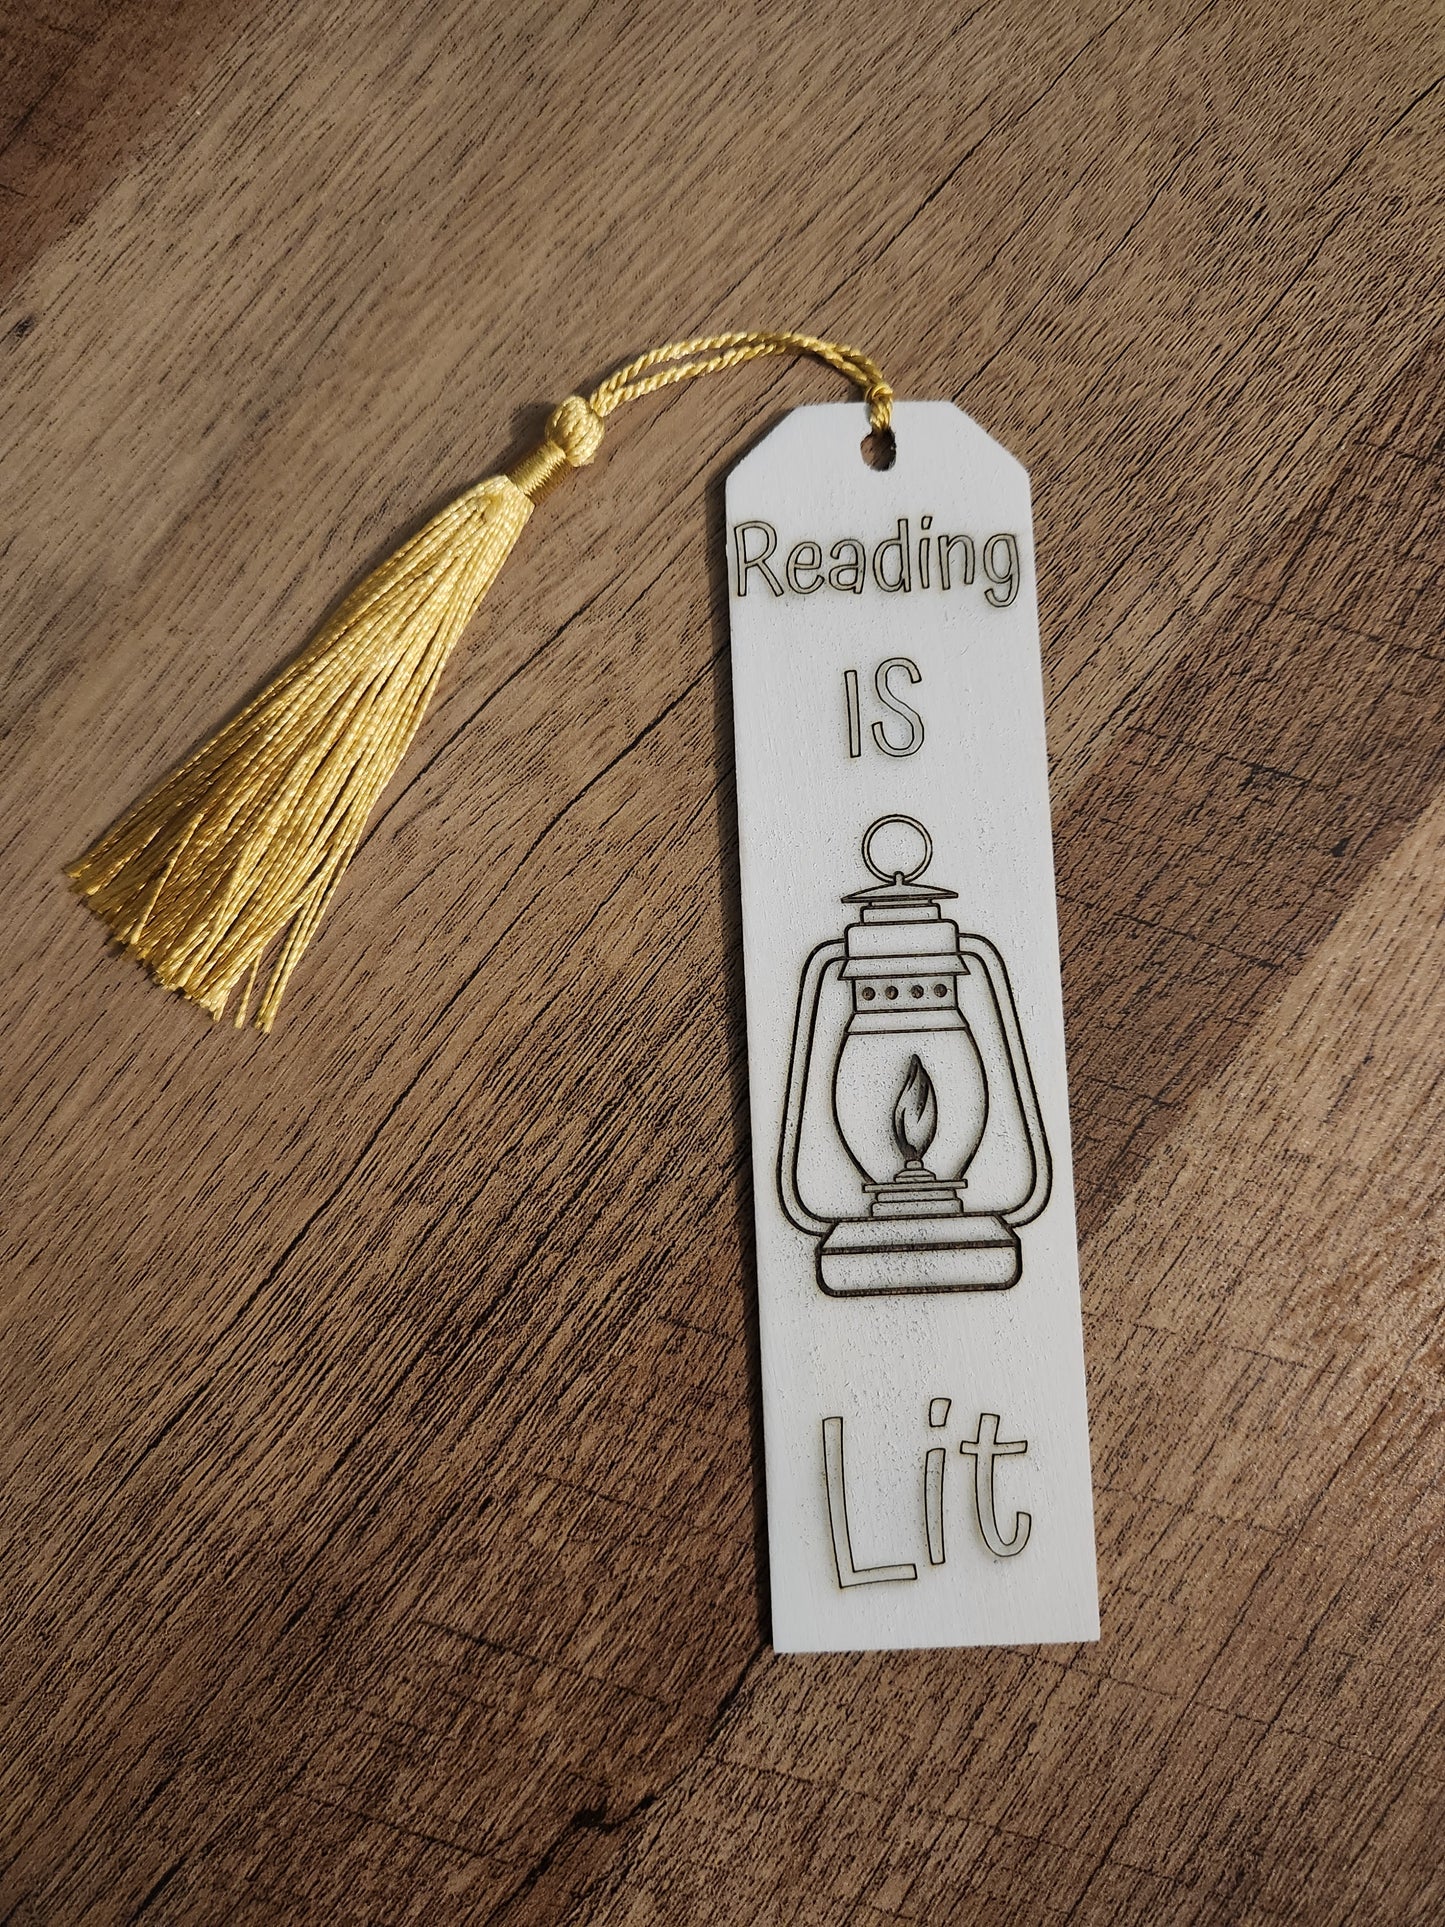 Reading is Lit Bookmarker